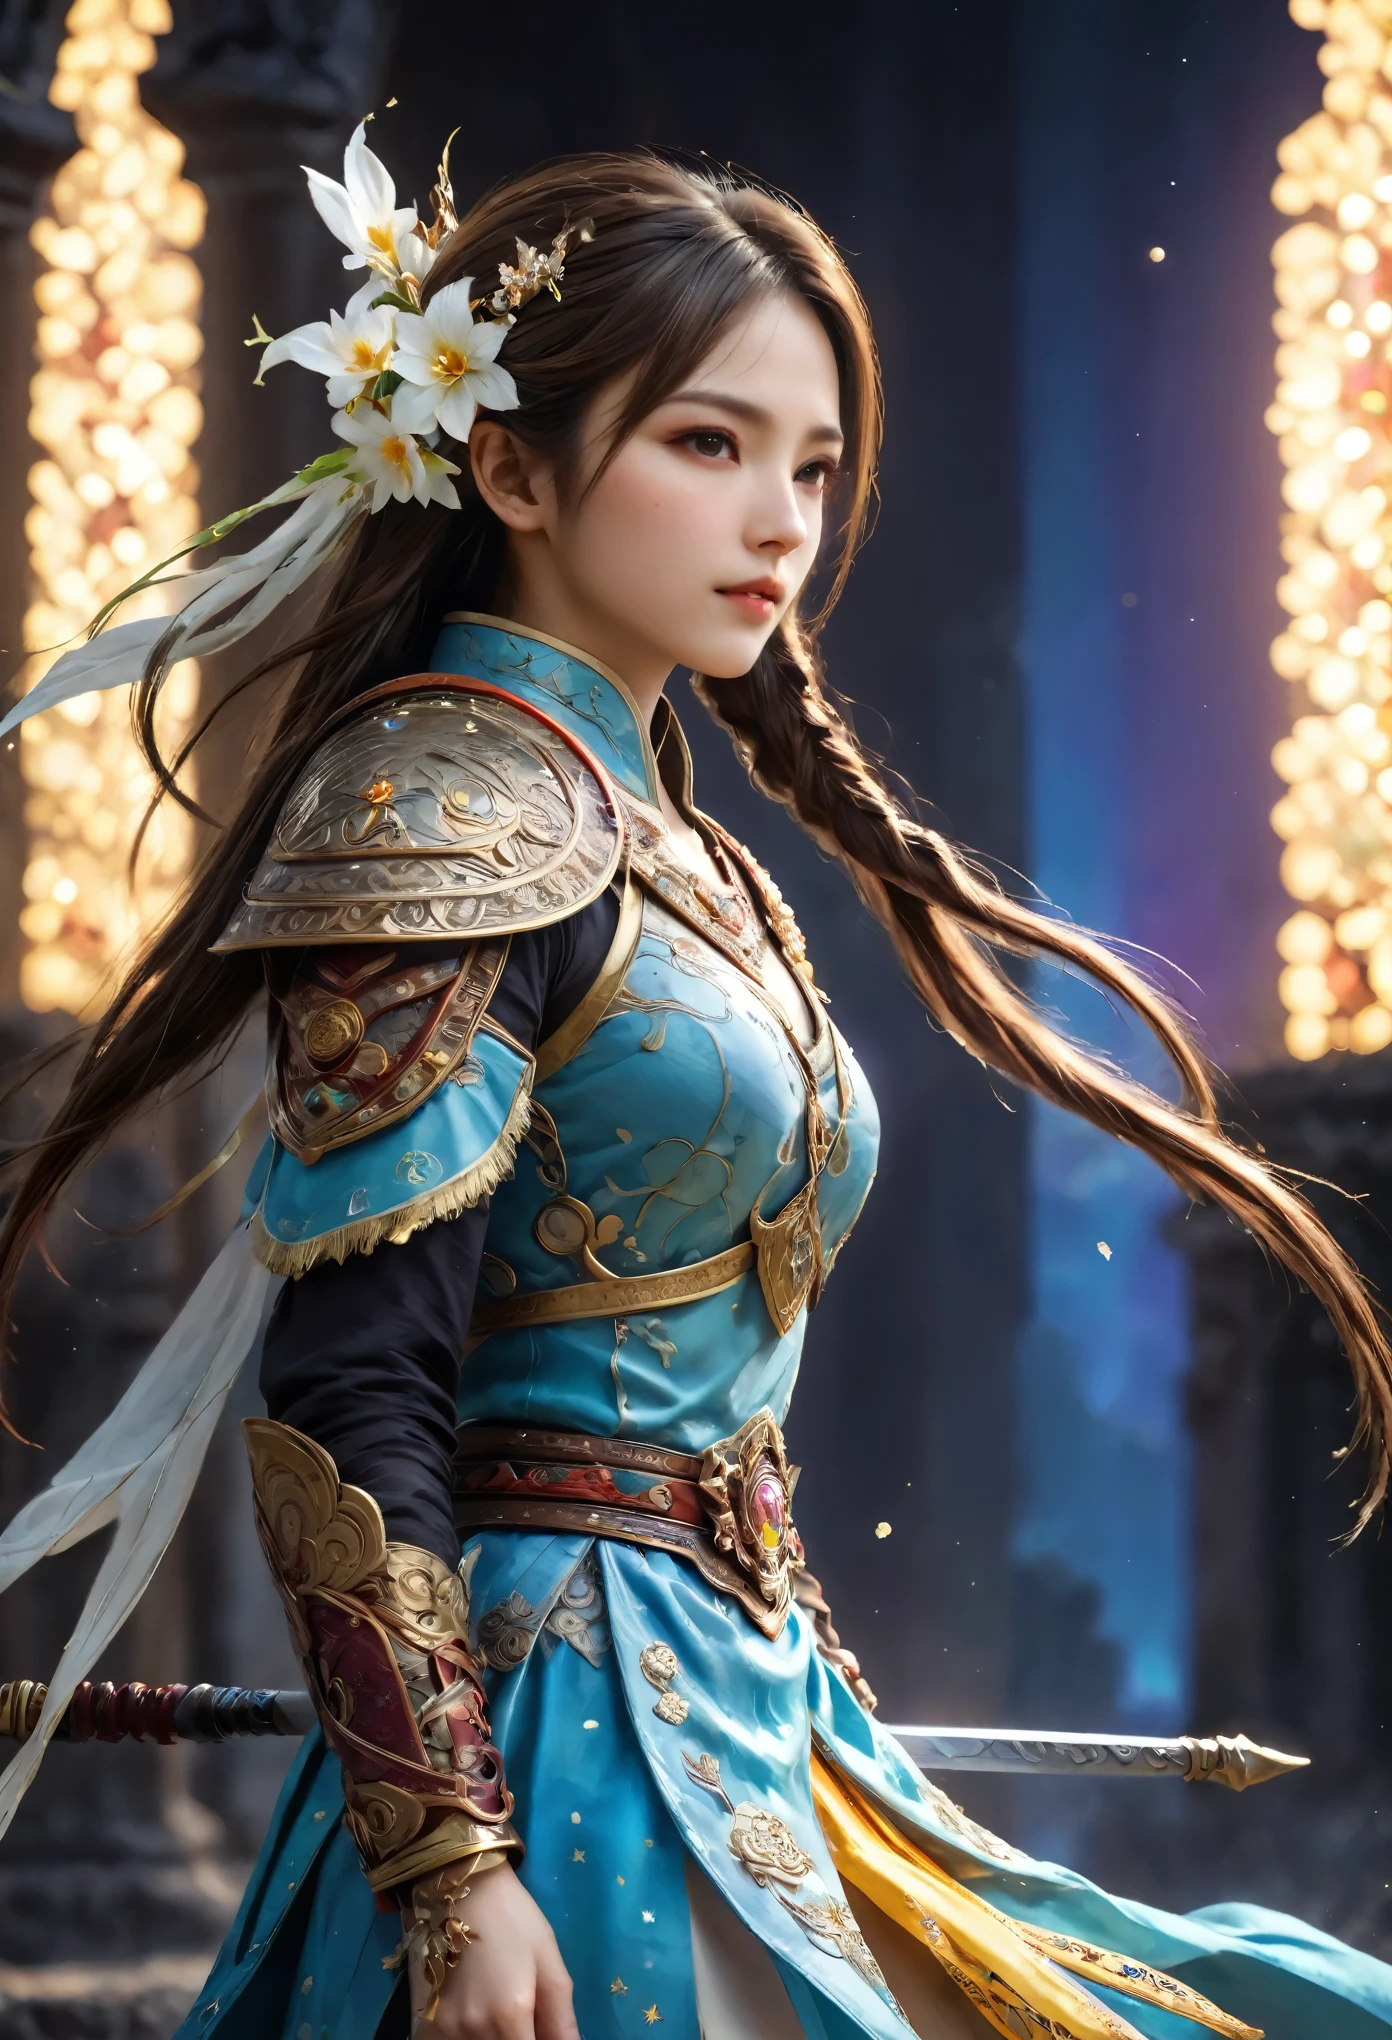 8K resolution, masterpiece, Highest quality, Award-winning works, unrealistic, final fantasy, Royal Jewel,Photorealistic Painting by Midjourney and Greg Rutkowski, , elegant, Very detailed, Delicate depiction of hair, miniature painting, Digital Painting, Art Station, Concept Art, Smooth, Sharp focus, shape, nature, Clear shadows, Full body portrait, Asura, God of War, Castle in the Sky, A strip of light pouring down from the sky, A pillar of light stretching to the sky, Complex colors, Buddhist Mandala, Colorful magic circle, flash, Mysterious Background, Aura, A gentle gaze, BREAK, Small faint lights and flying fireflies, night, Starry Sky, milky way, nebula, shooting star, Flowers, birds, wind and moon,erotic, sole sexy lady, healthy shaped body, Anatomically accurate skeleton, 22 years old lady, Asura, 170cm tall, huge firm bouncing busts, Holy sword in both hands, Complicated armor, Brightly colored armor, battlefield, fight, dash